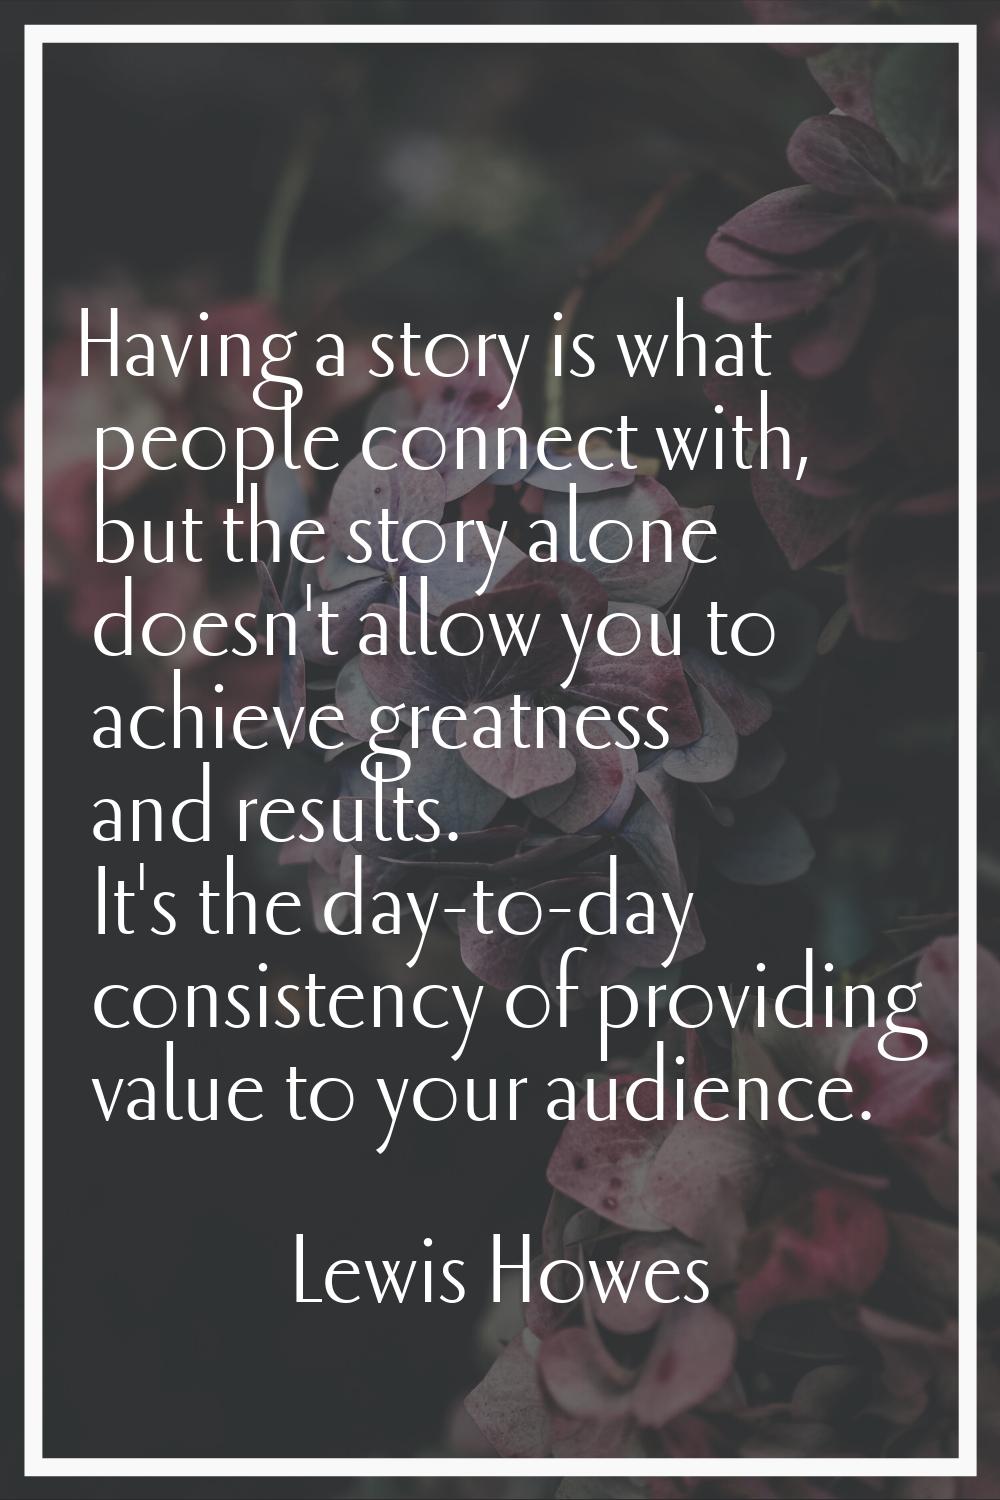 Having a story is what people connect with, but the story alone doesn't allow you to achieve greatn